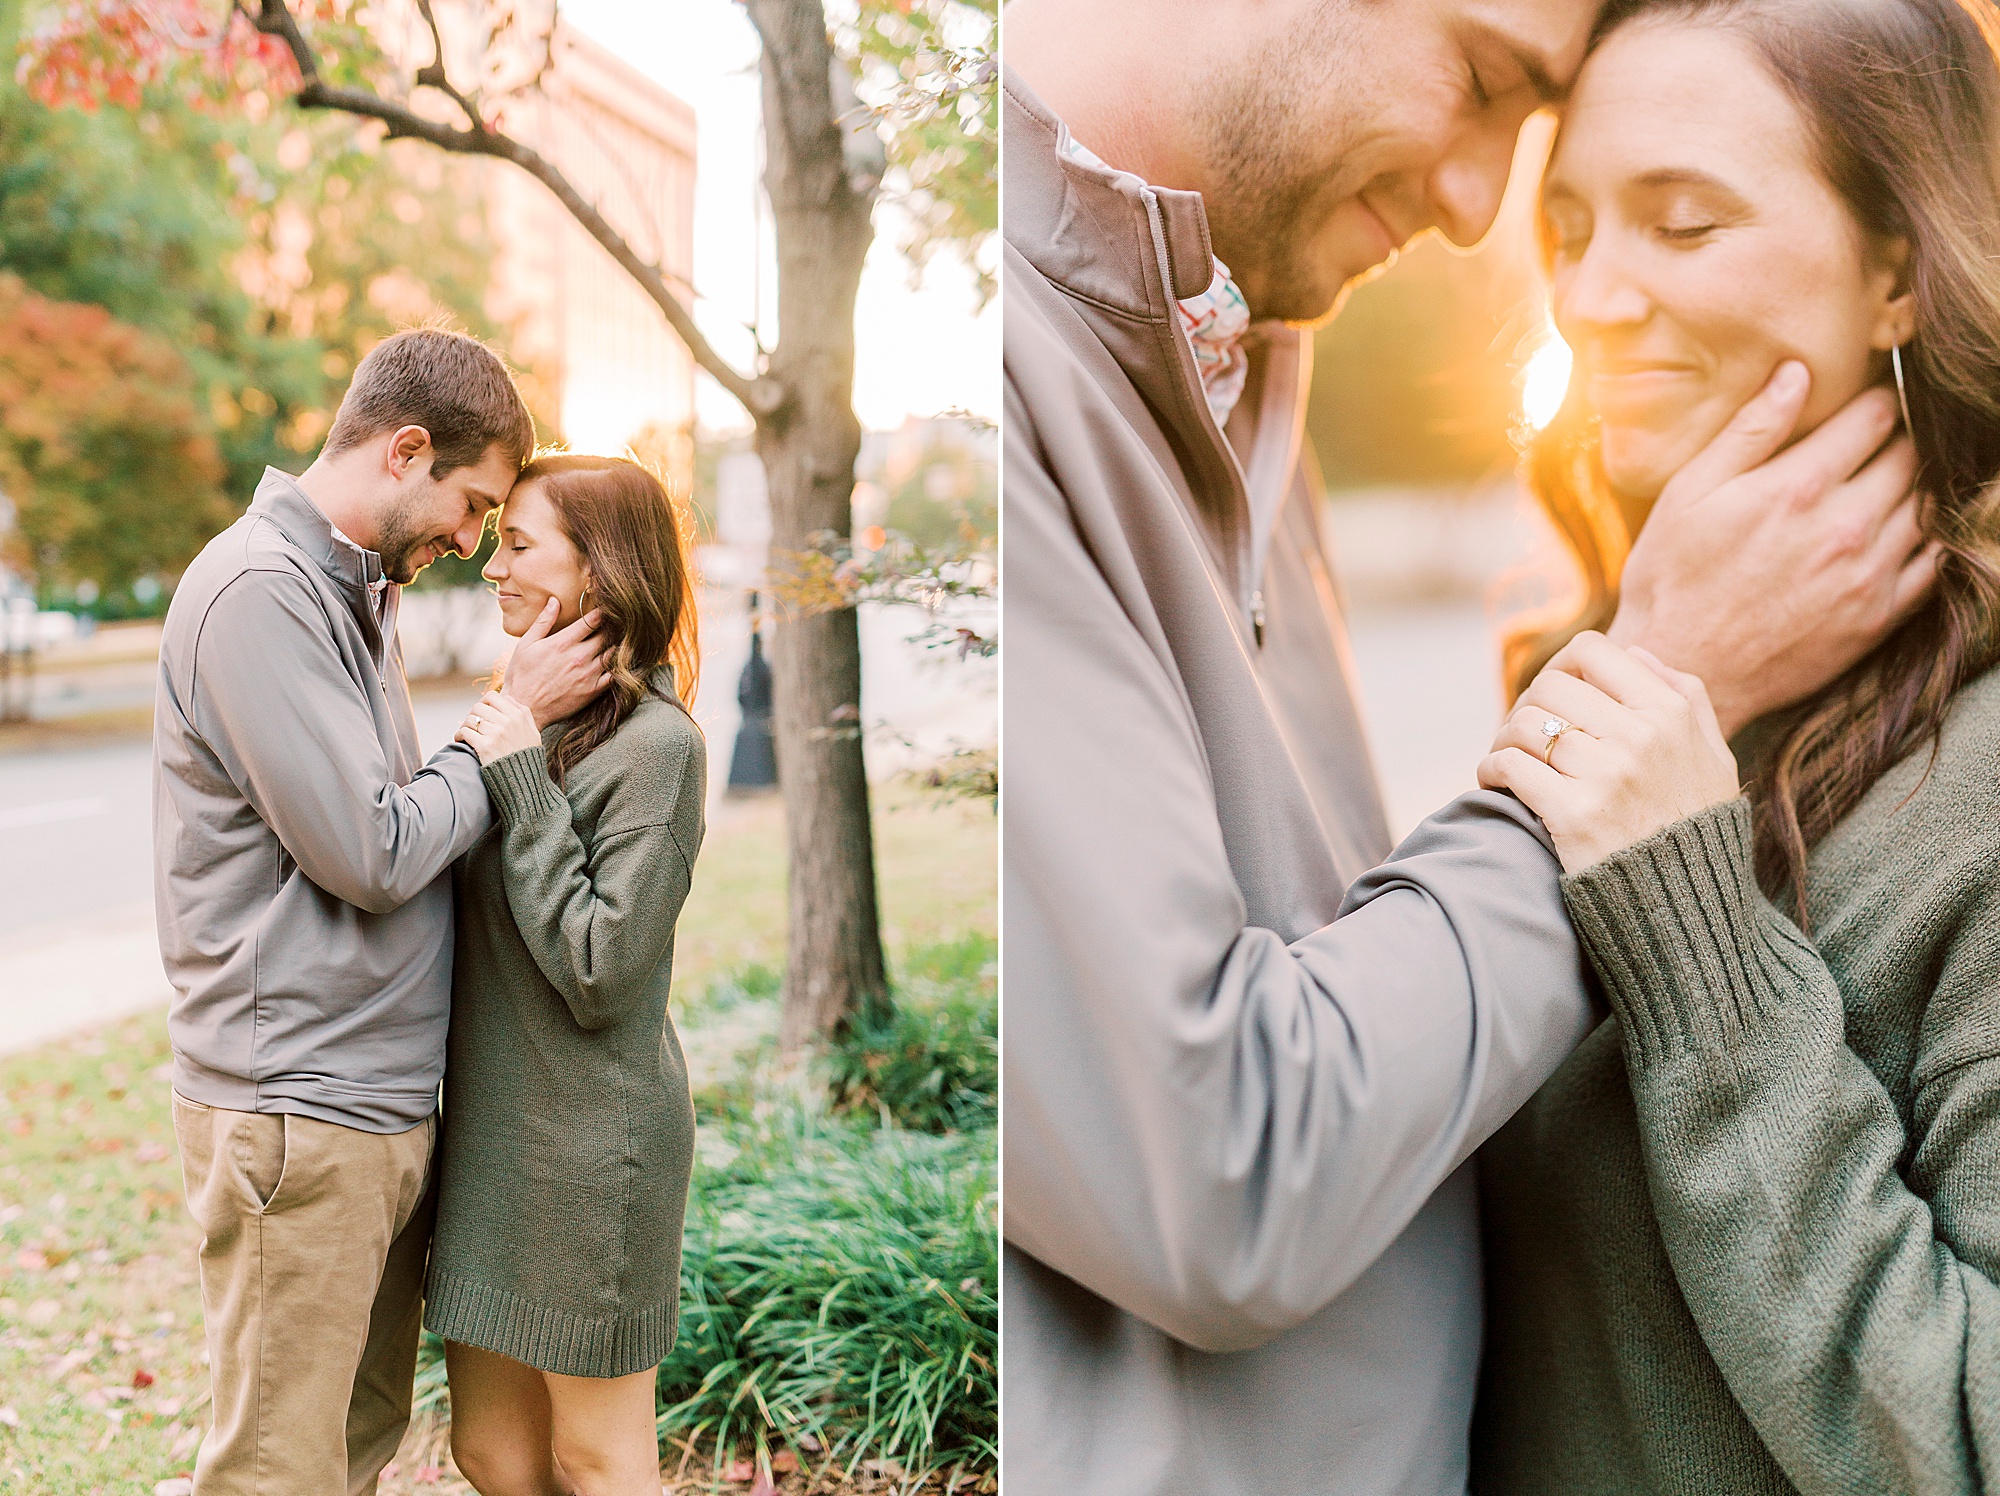 woman holds man's hands against cheeks during sunset Marshall Park engagement session